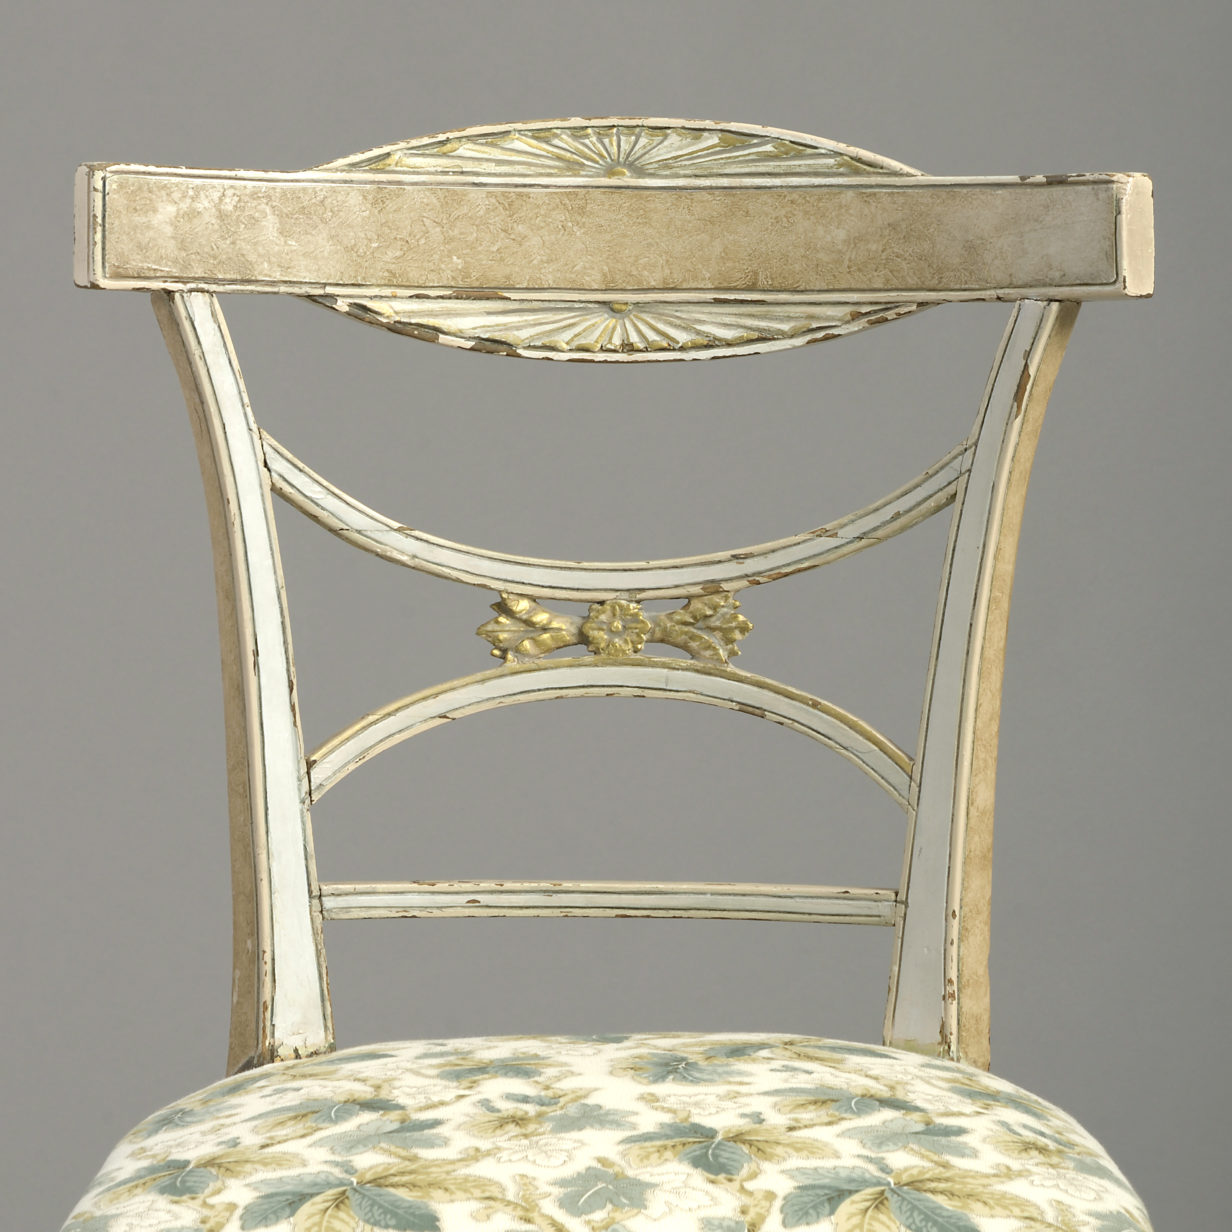 Early 19th century painted gustavian side chair